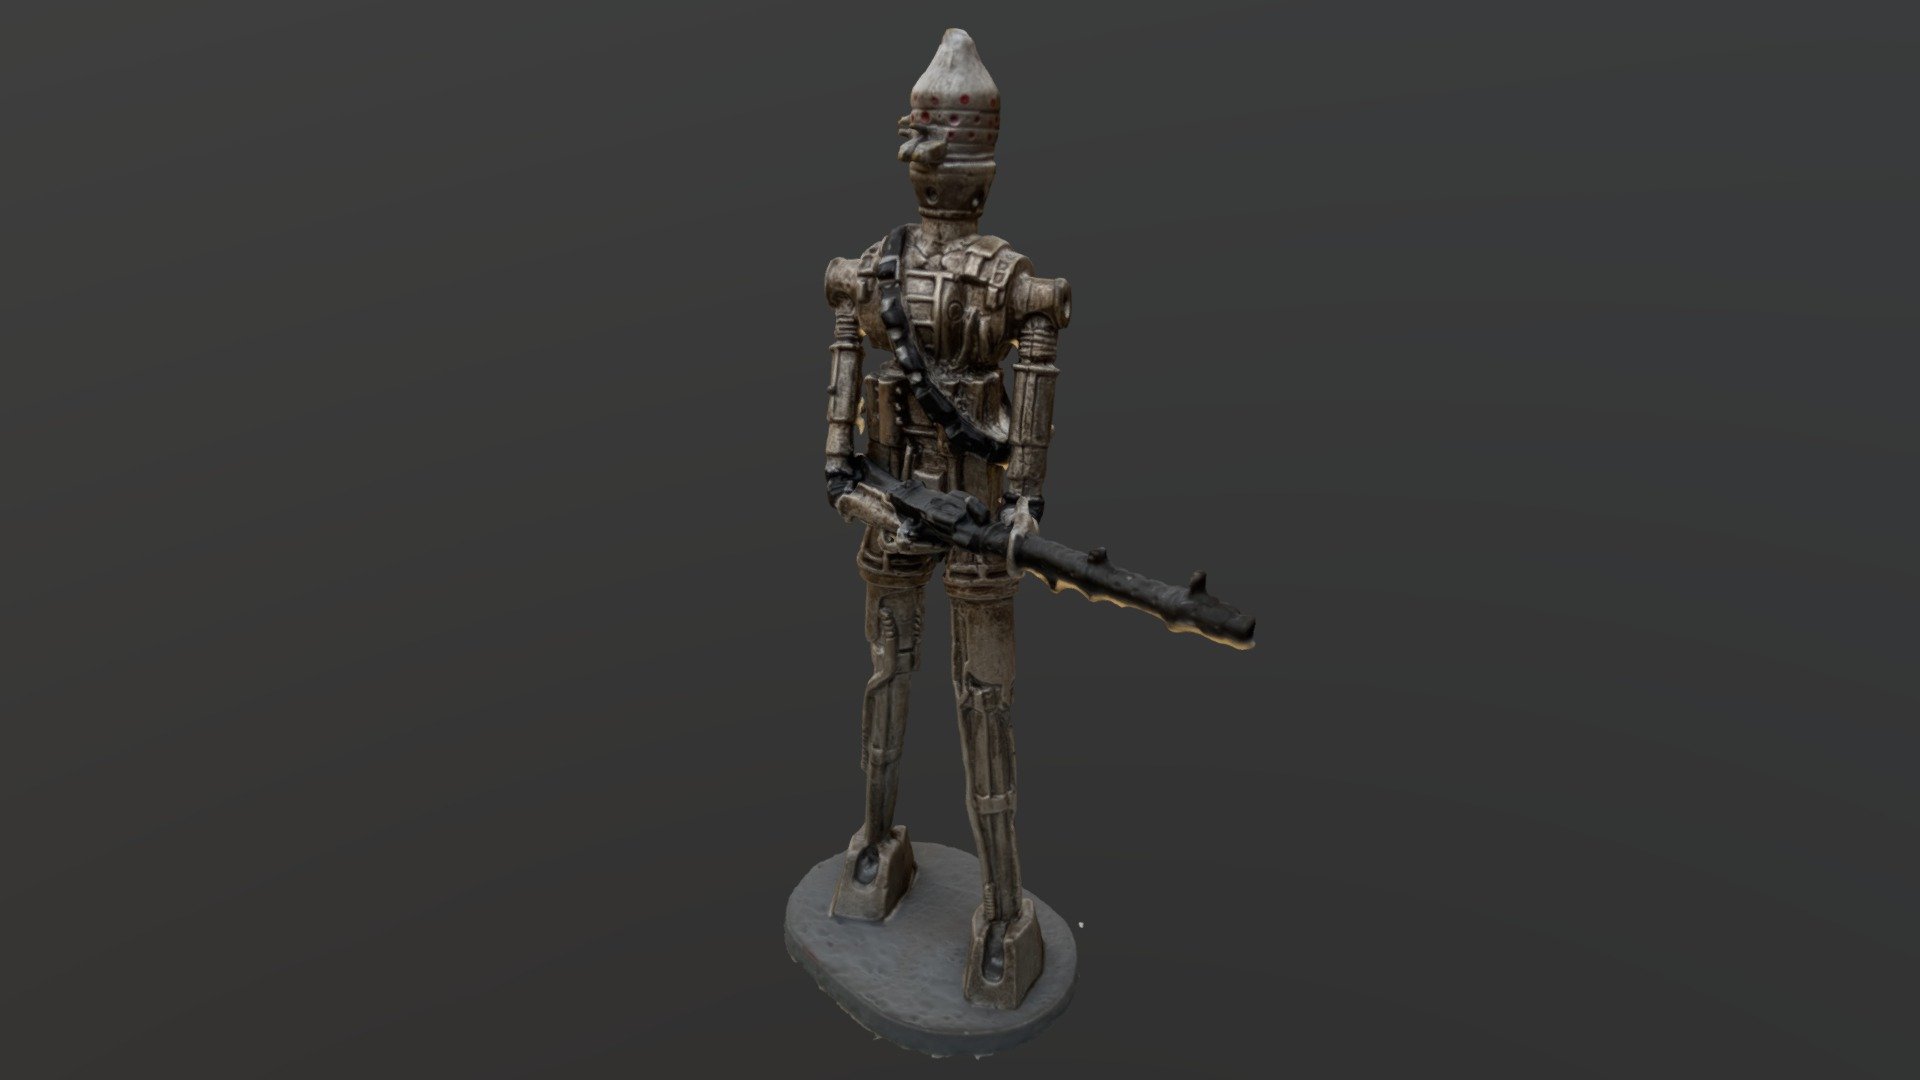 A miniature lead statue of IG-88, a character from the Star Wars franchise, captured with RealityScan photogrammetry software 3d model